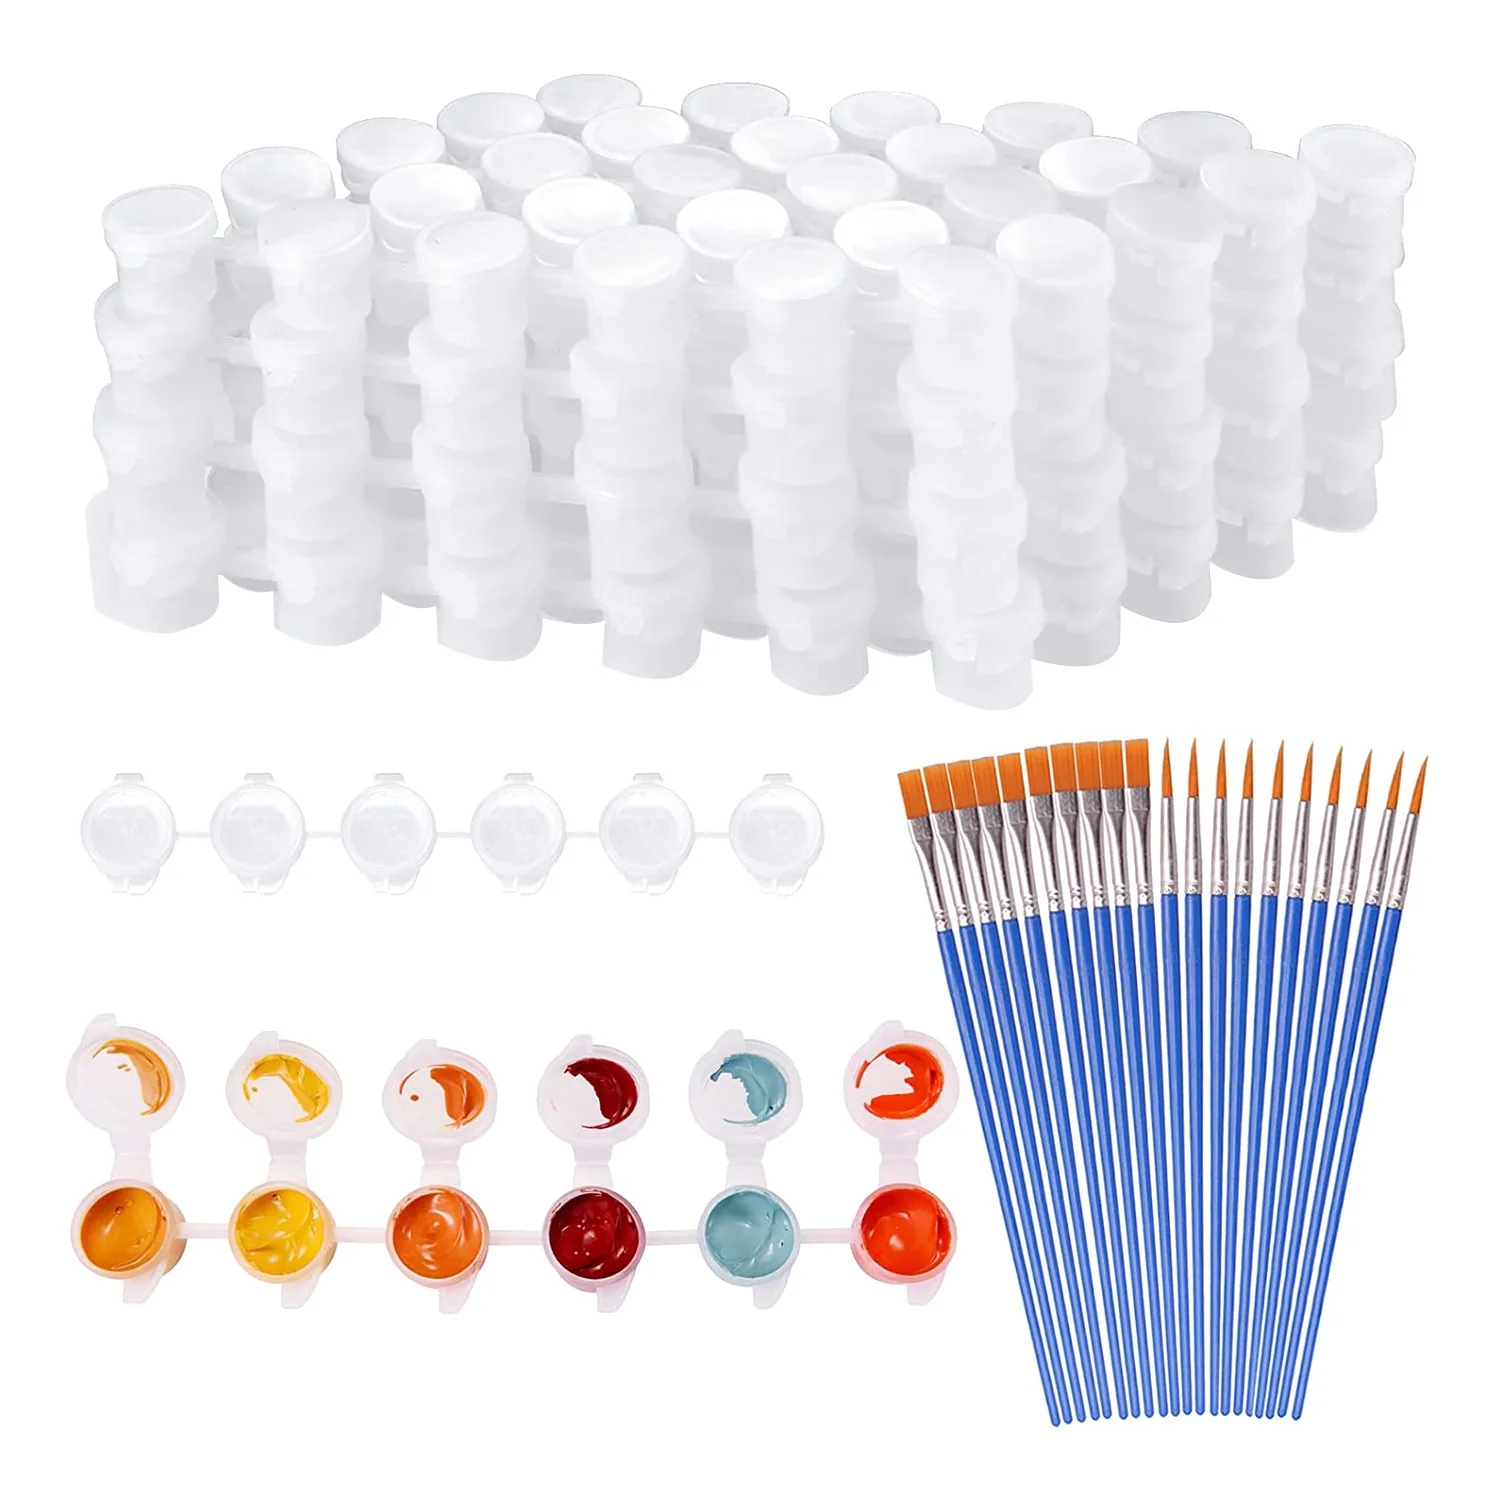 

20 Strips 120 Pots Empty Paint Strips and 20 Pieces Paint Brushes,Paint Cup Clear Plastic Storage Containers,3Ml/0.17Oz